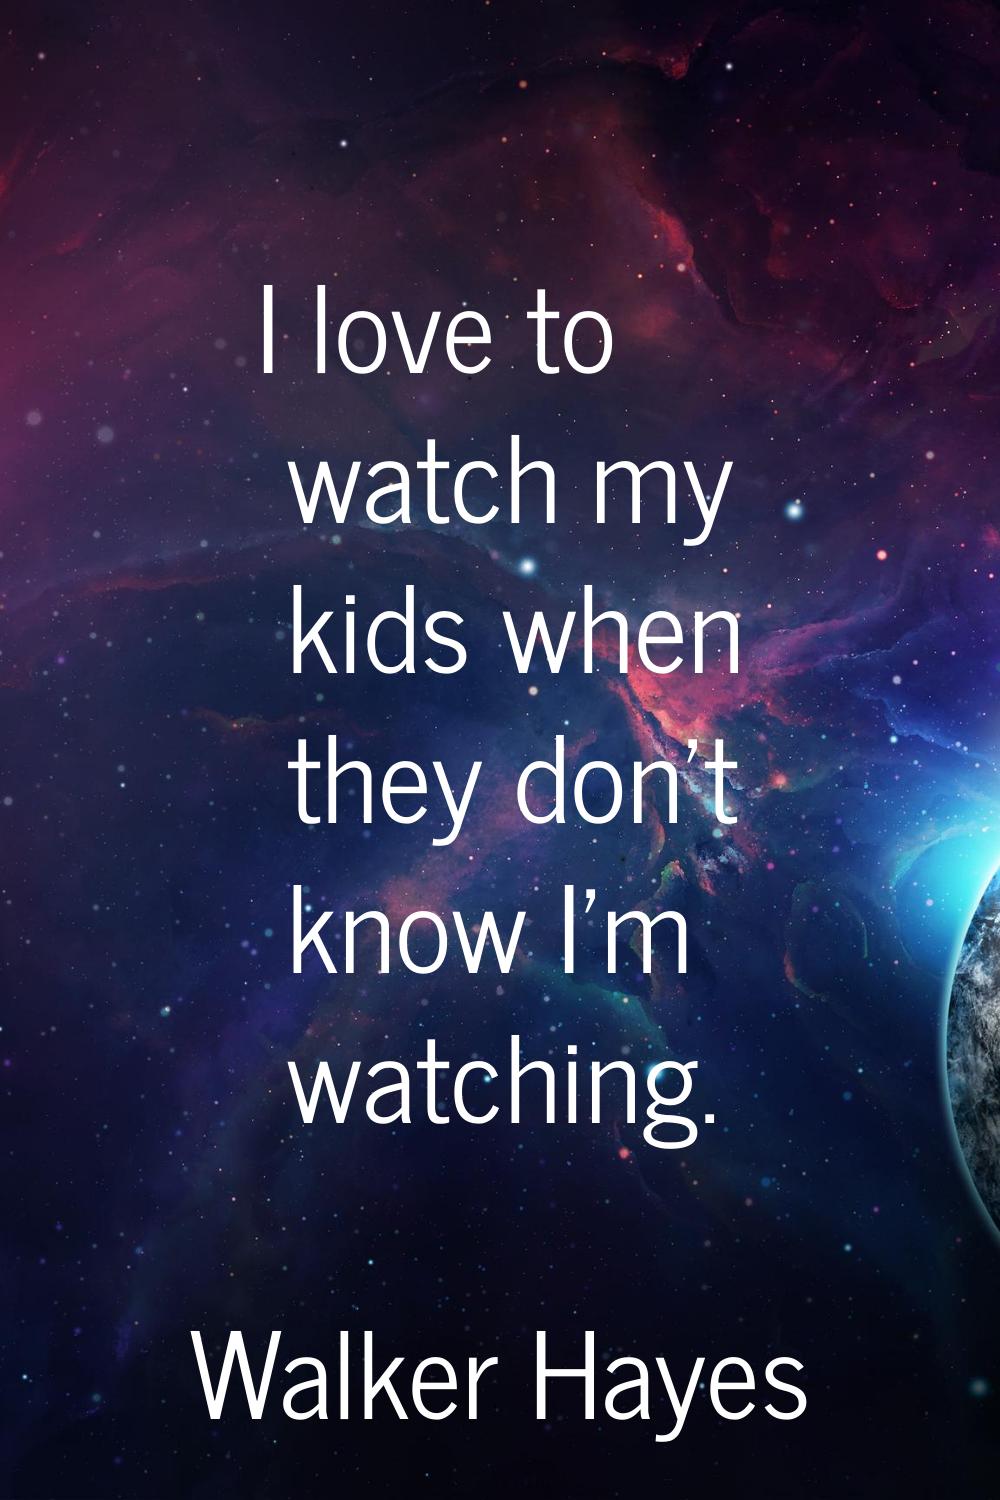 I love to watch my kids when they don't know I'm watching.